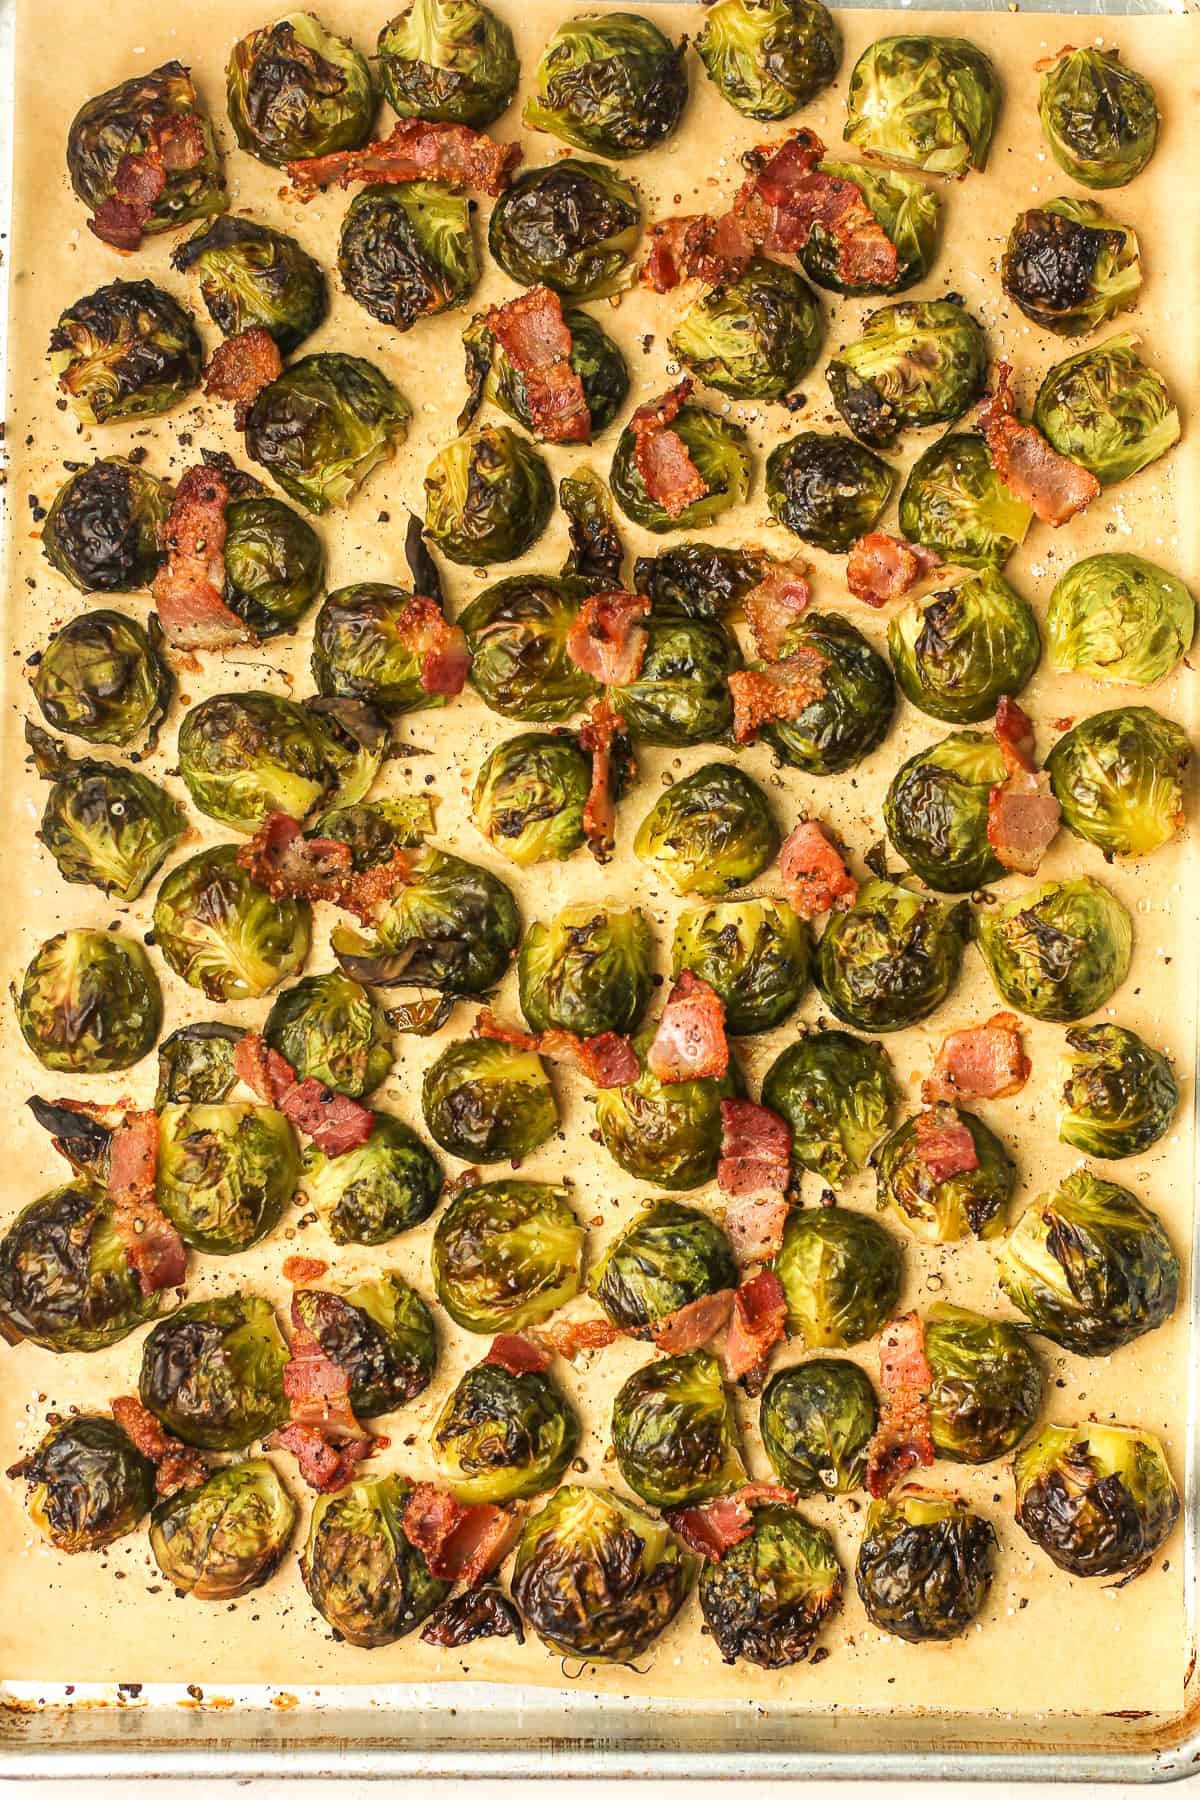 A sheet pan of roasted brussels sprouts with bacon pieces on top.